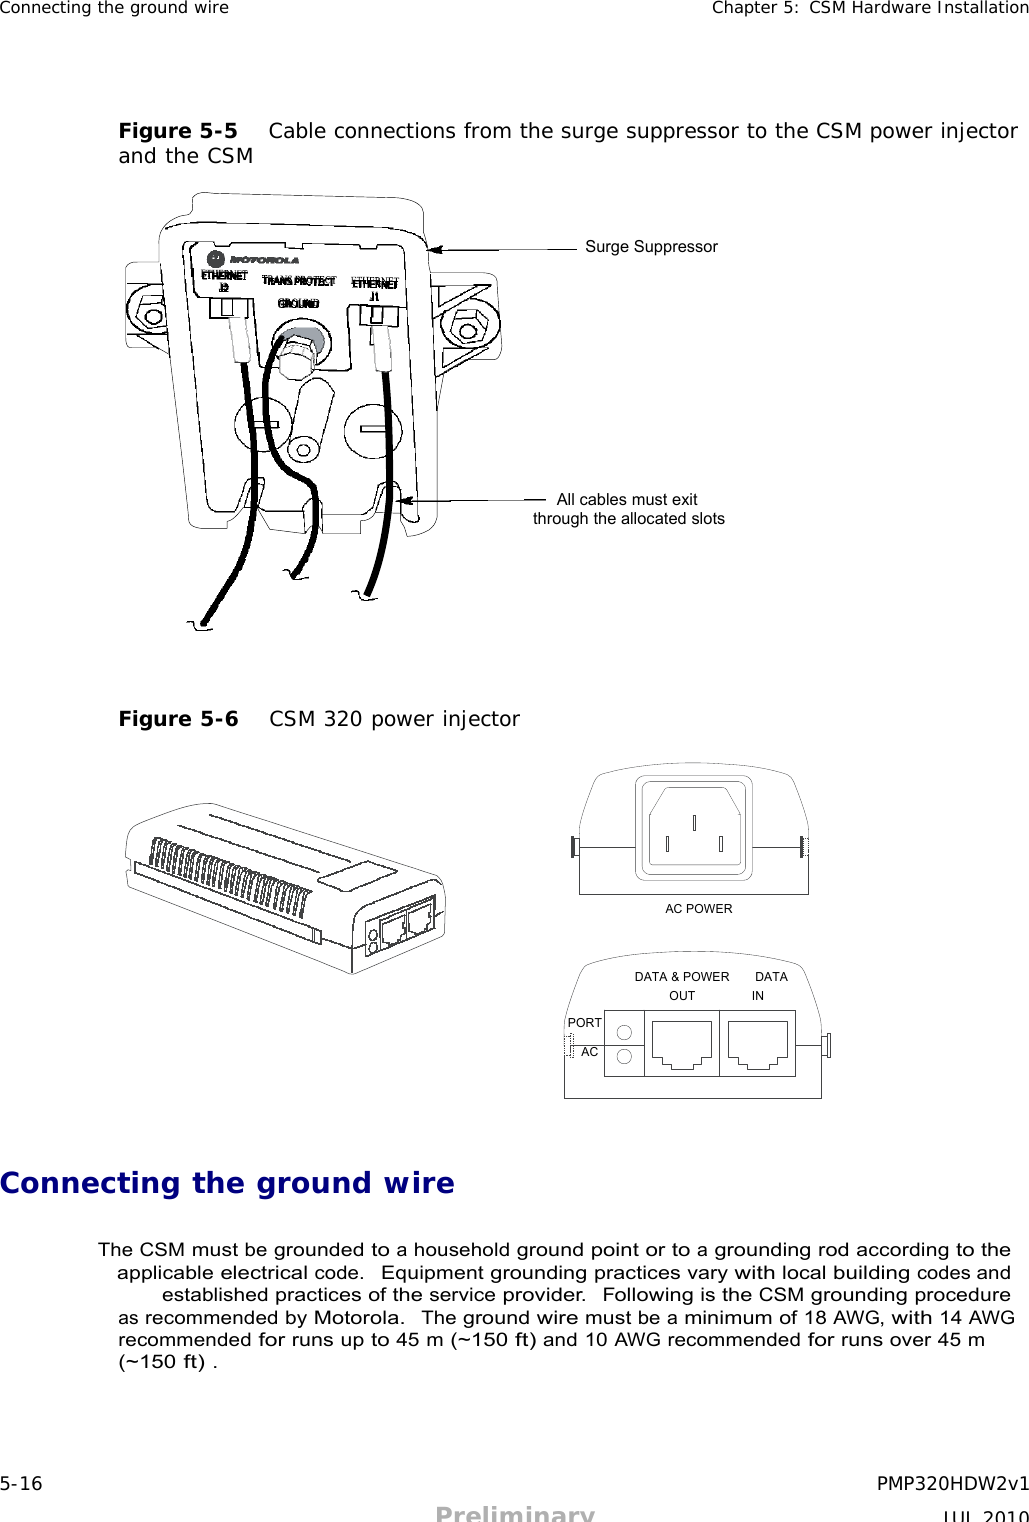 5-16 PMP320HDW2v1 Preliminary JUL 2010     Connecting the ground wire Chapter 5: CSM Hardware Installation      Figure 5-5   Cable connections from the surge suppressor to the CSM power injector and the CSM    Surge Suppressor            All cables must exit through the allocated slots          Figure 5-6   CSM 320 power injector         AC POWER    DATA &amp; POWER    DATA OUT IN  PORT  AC      Connecting the ground wire   The CSM must be grounded to a household ground point or to a grounding rod according to the applicable electrical code.  Equipment grounding practices vary with local building codes and established practices of the service provider.  Following is the CSM grounding procedure as recommended by Motorola.  The ground wire must be a minimum of 18 AWG, with 14 AWG recommended for runs up to 45 m (~150 ft) and 10 AWG recommended for runs over 45 m (~150 ft) . 